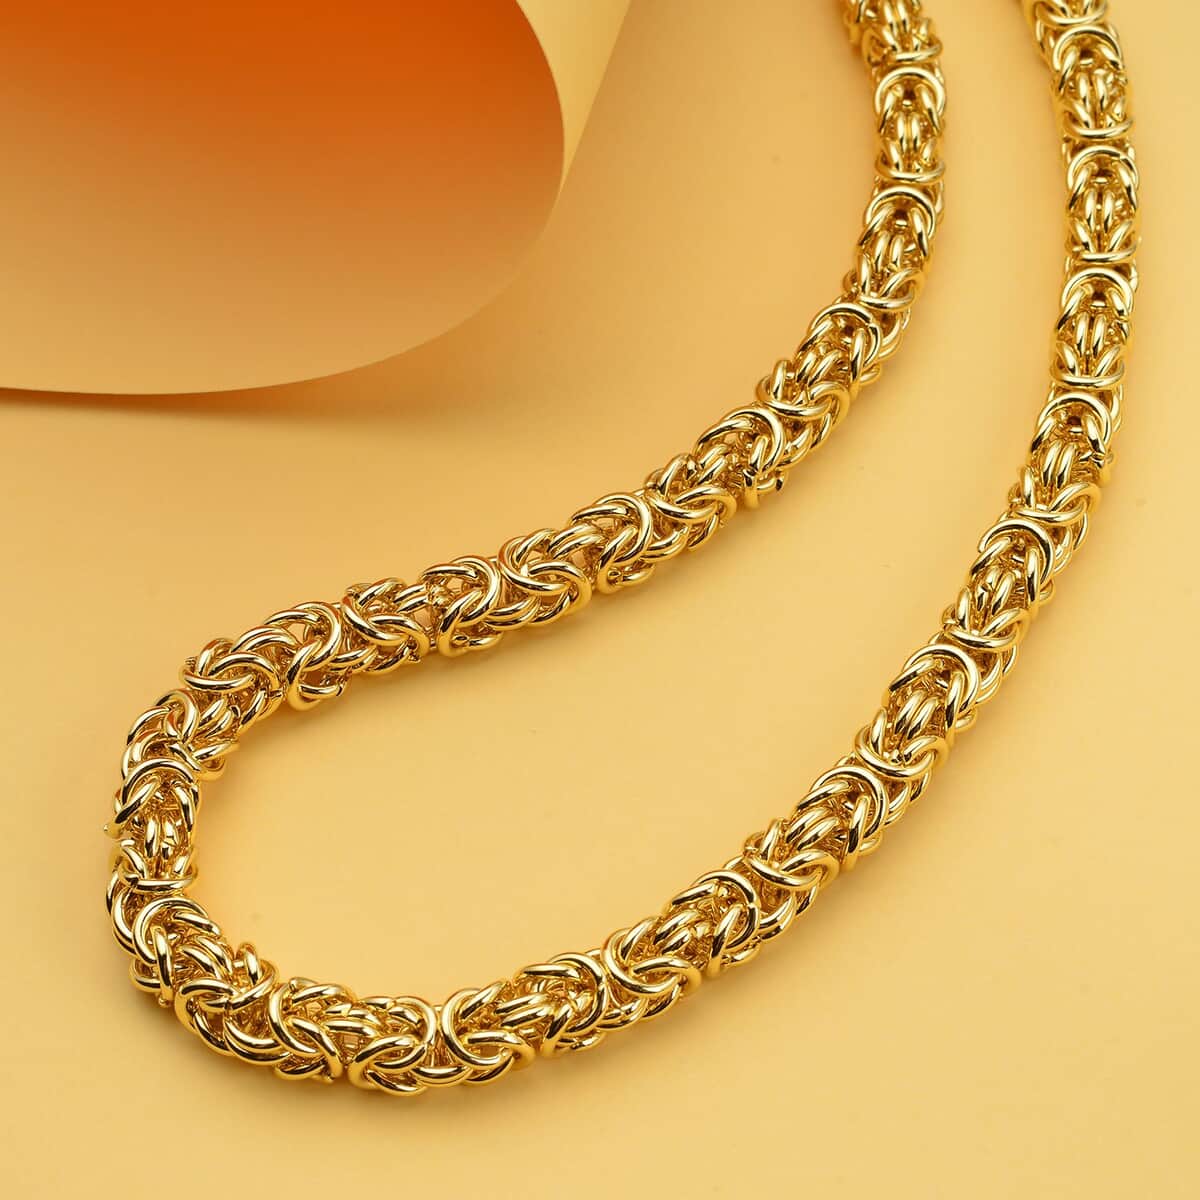 Fashionable Byzantine Link Chain Necklace (20-22 Inches) in ION Plated YG Stainless Steel (97.30 g) | Tarnish-Free, Waterproof, Sweat Proof Jewelry image number 1